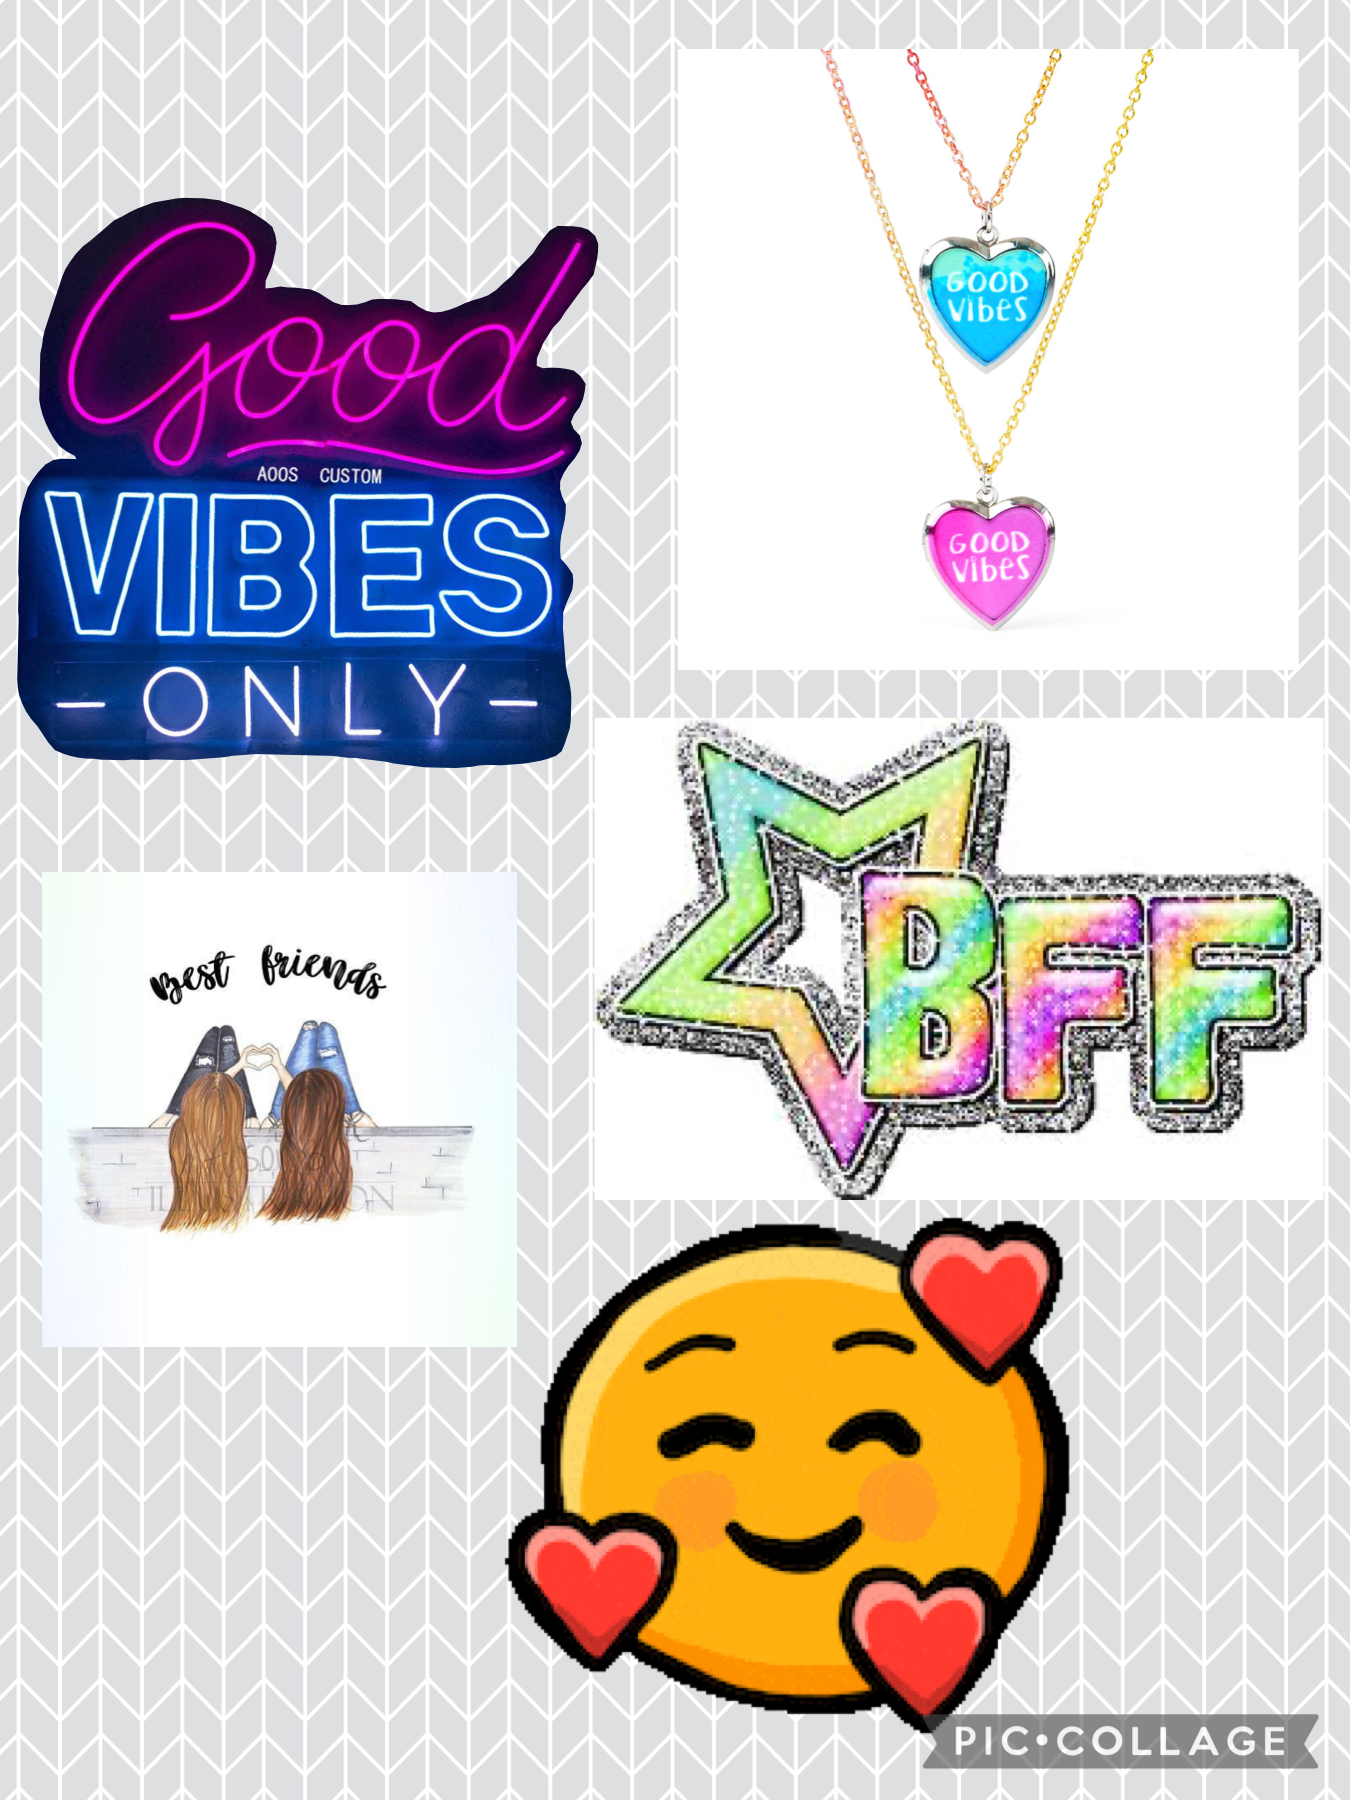 Good vibes with besties xx 
Comment what collage I should do next xx